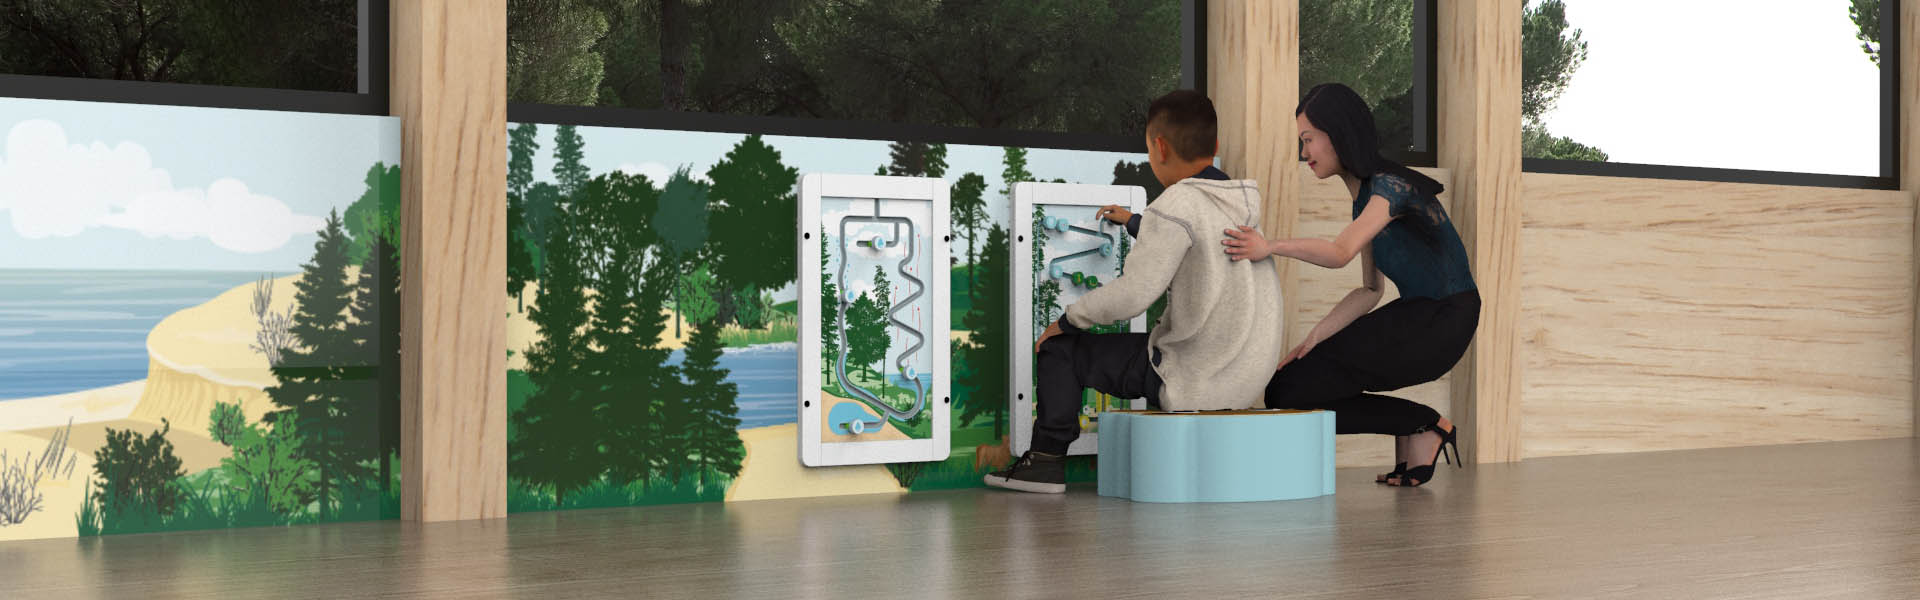 This image shows a boy playing with a educational wall game